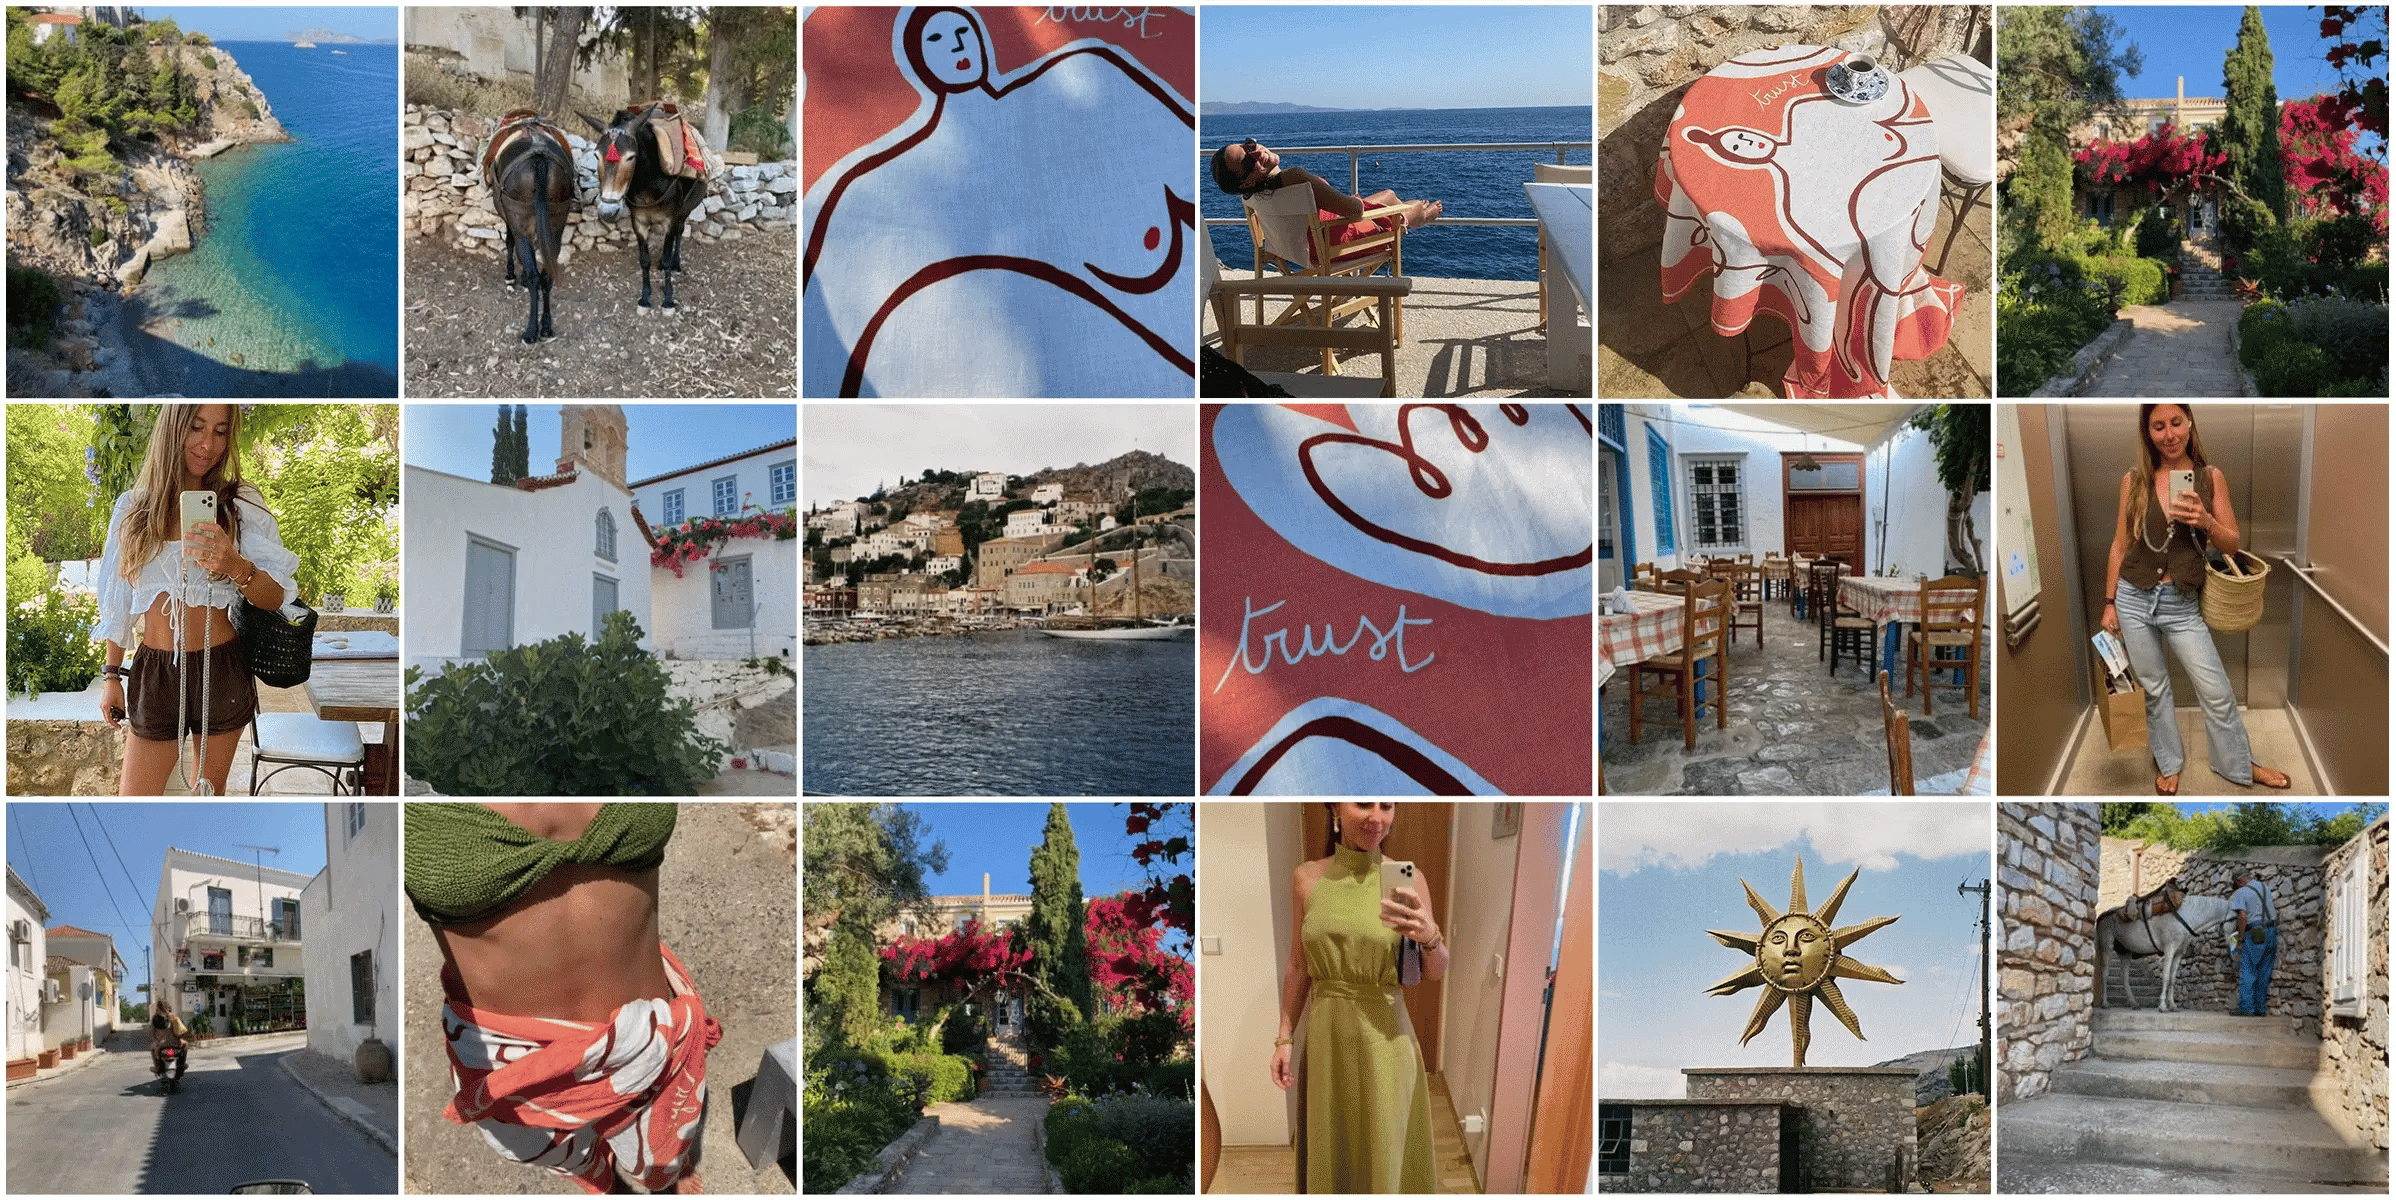 A postcard from Hydra